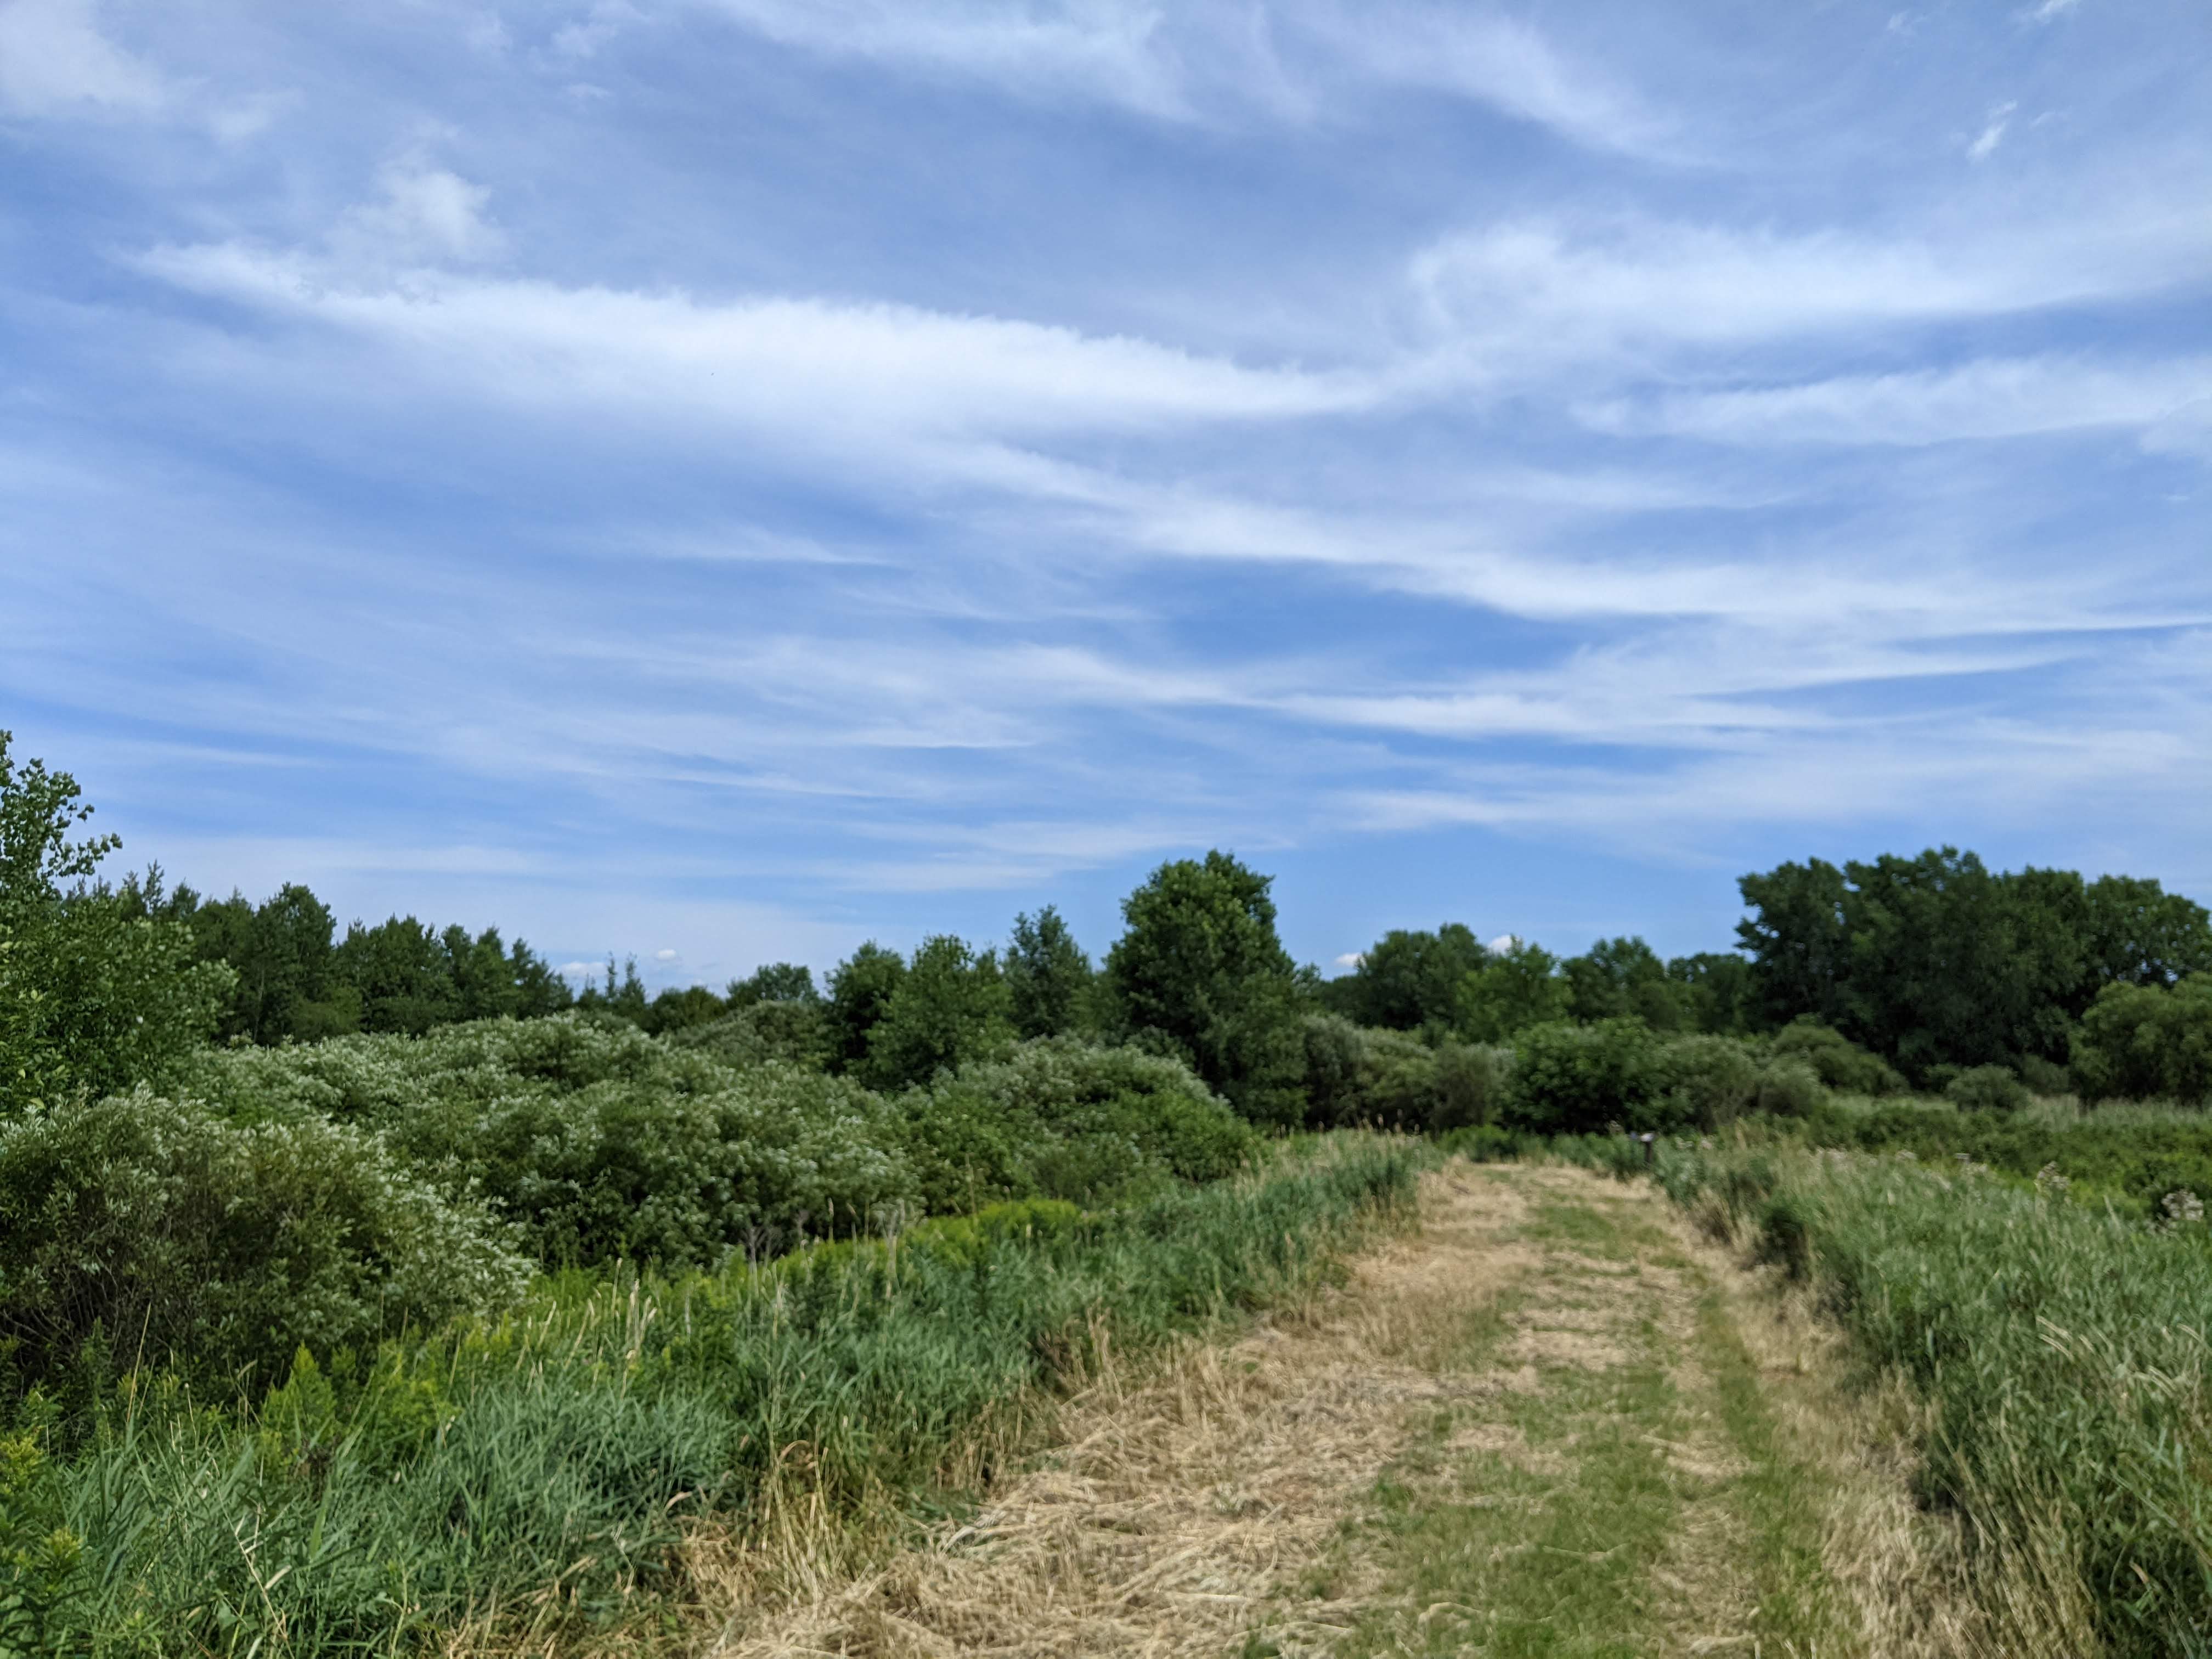 Coughlin Community Natural Area